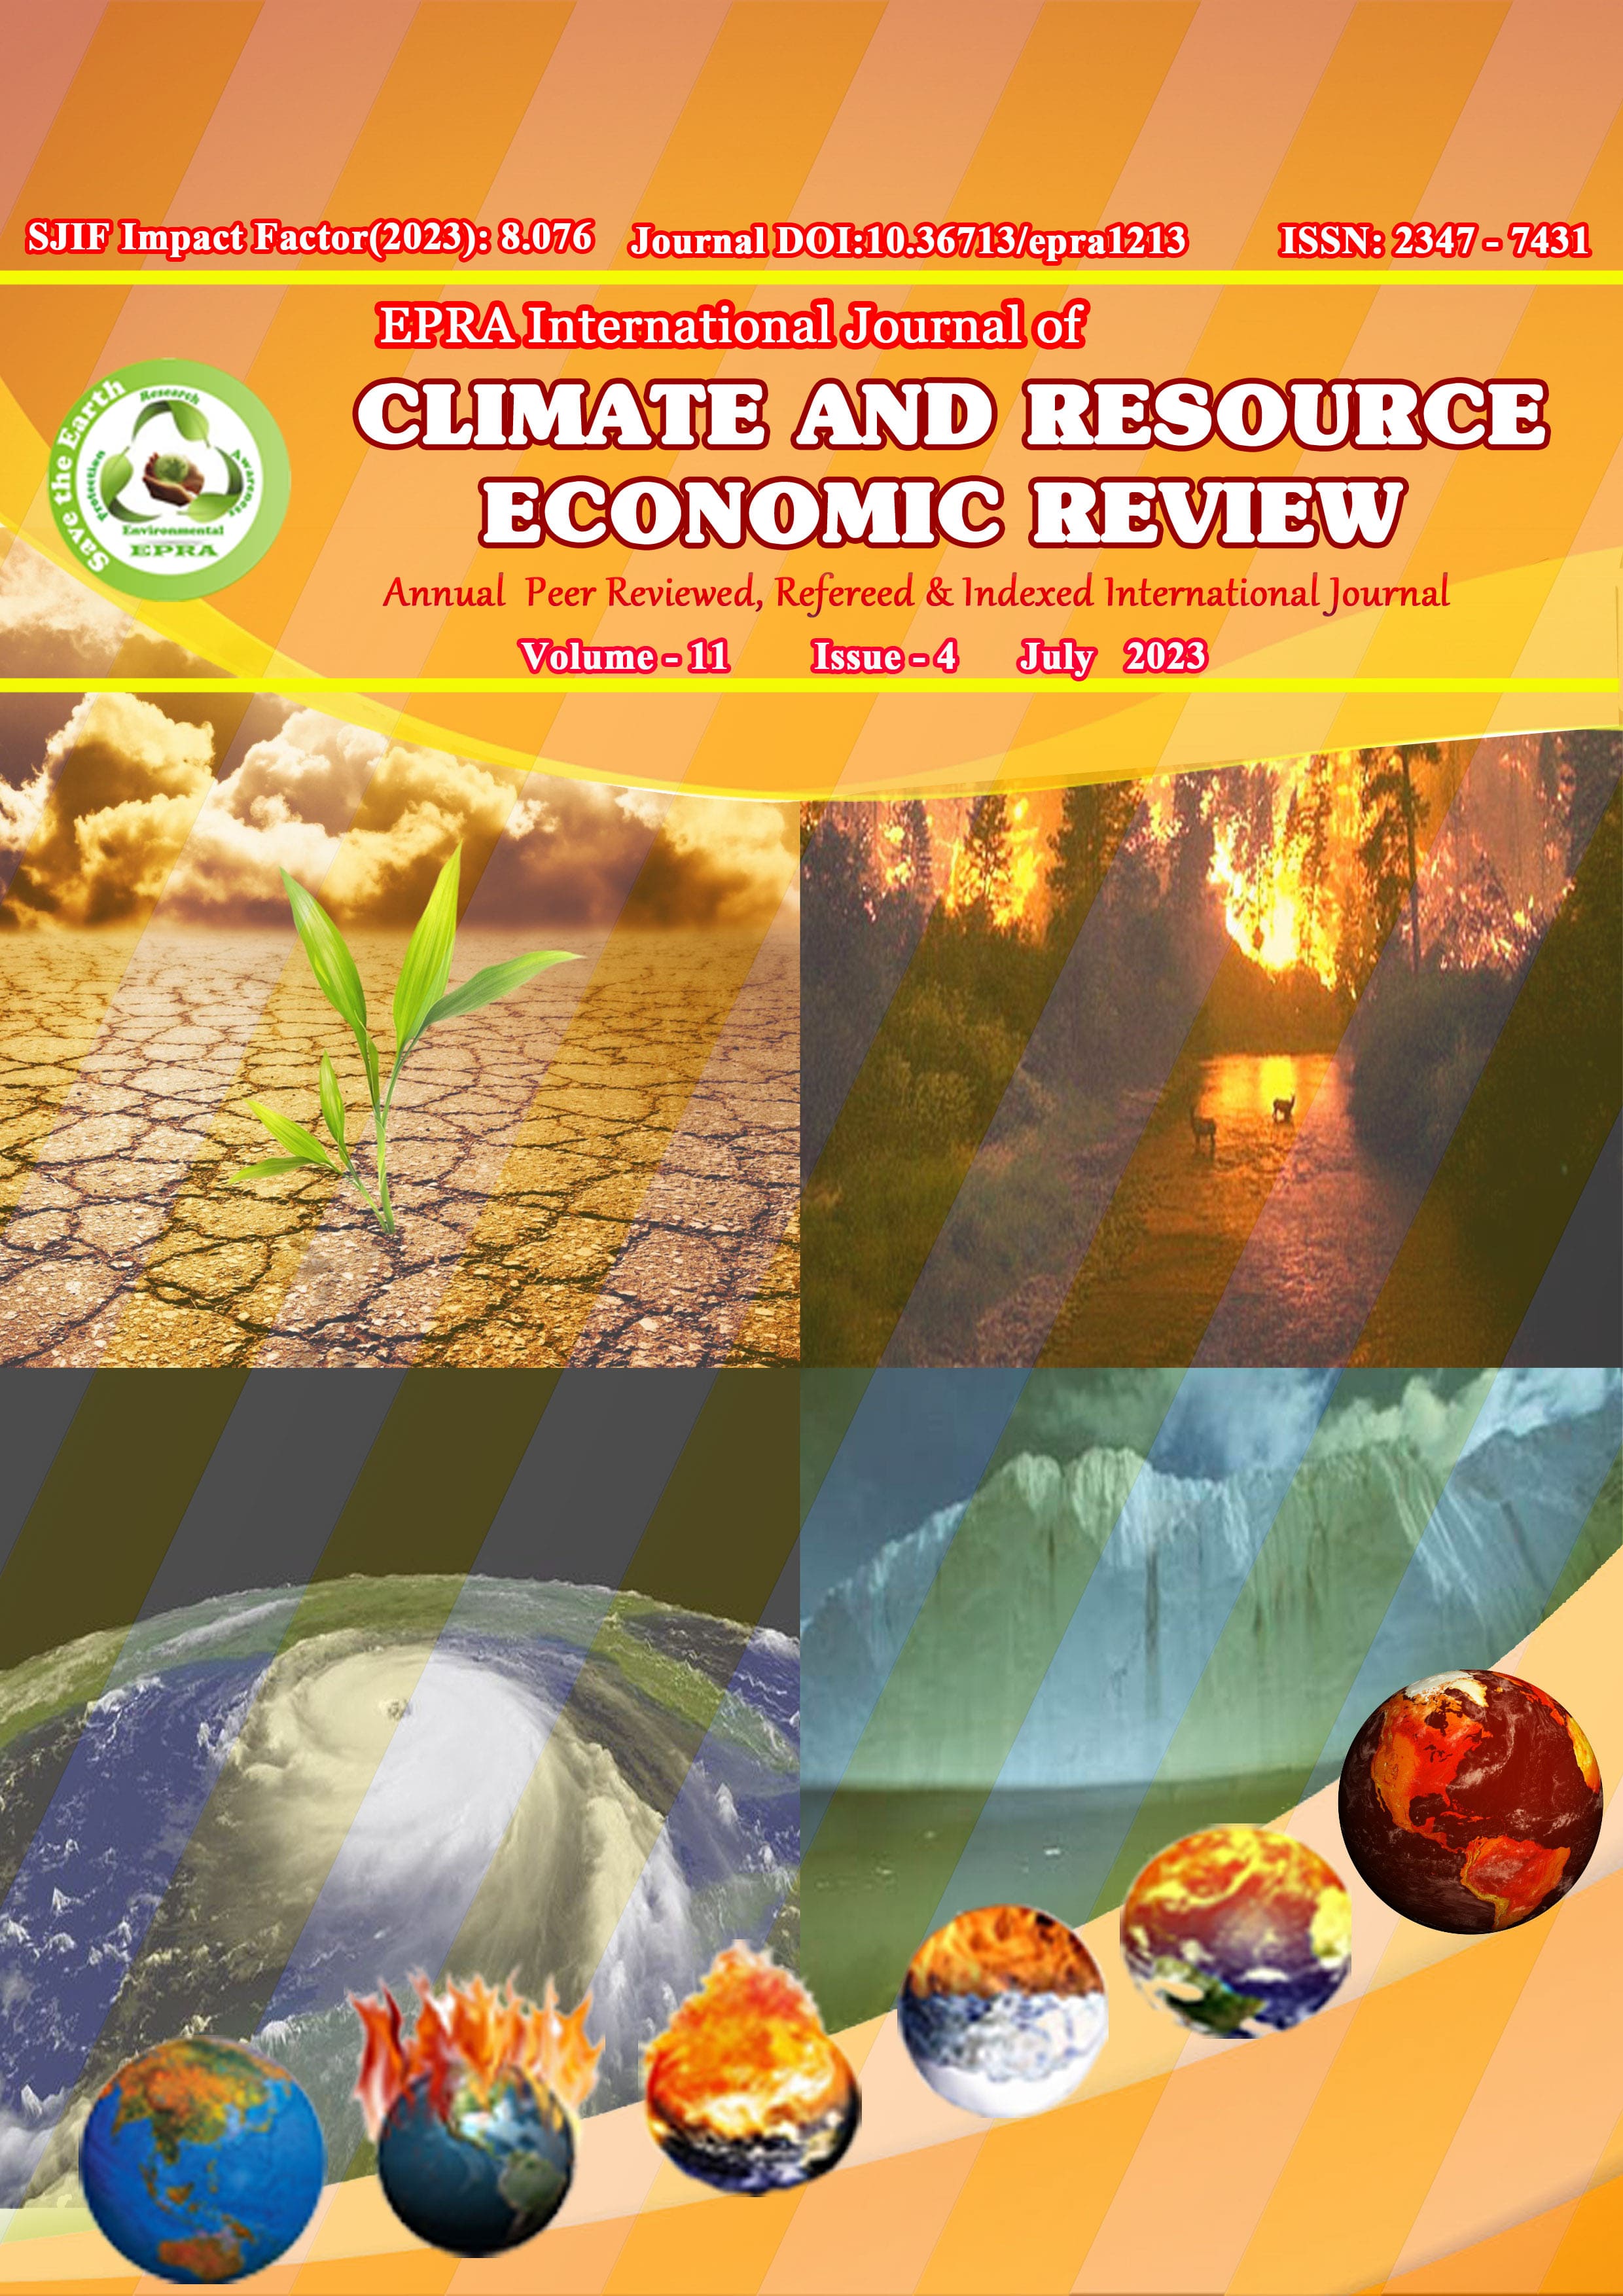 					View Vol. 11 No. 4 (2023): EPRA International Journal of Climate and Resource Economic Review(CRER)
				